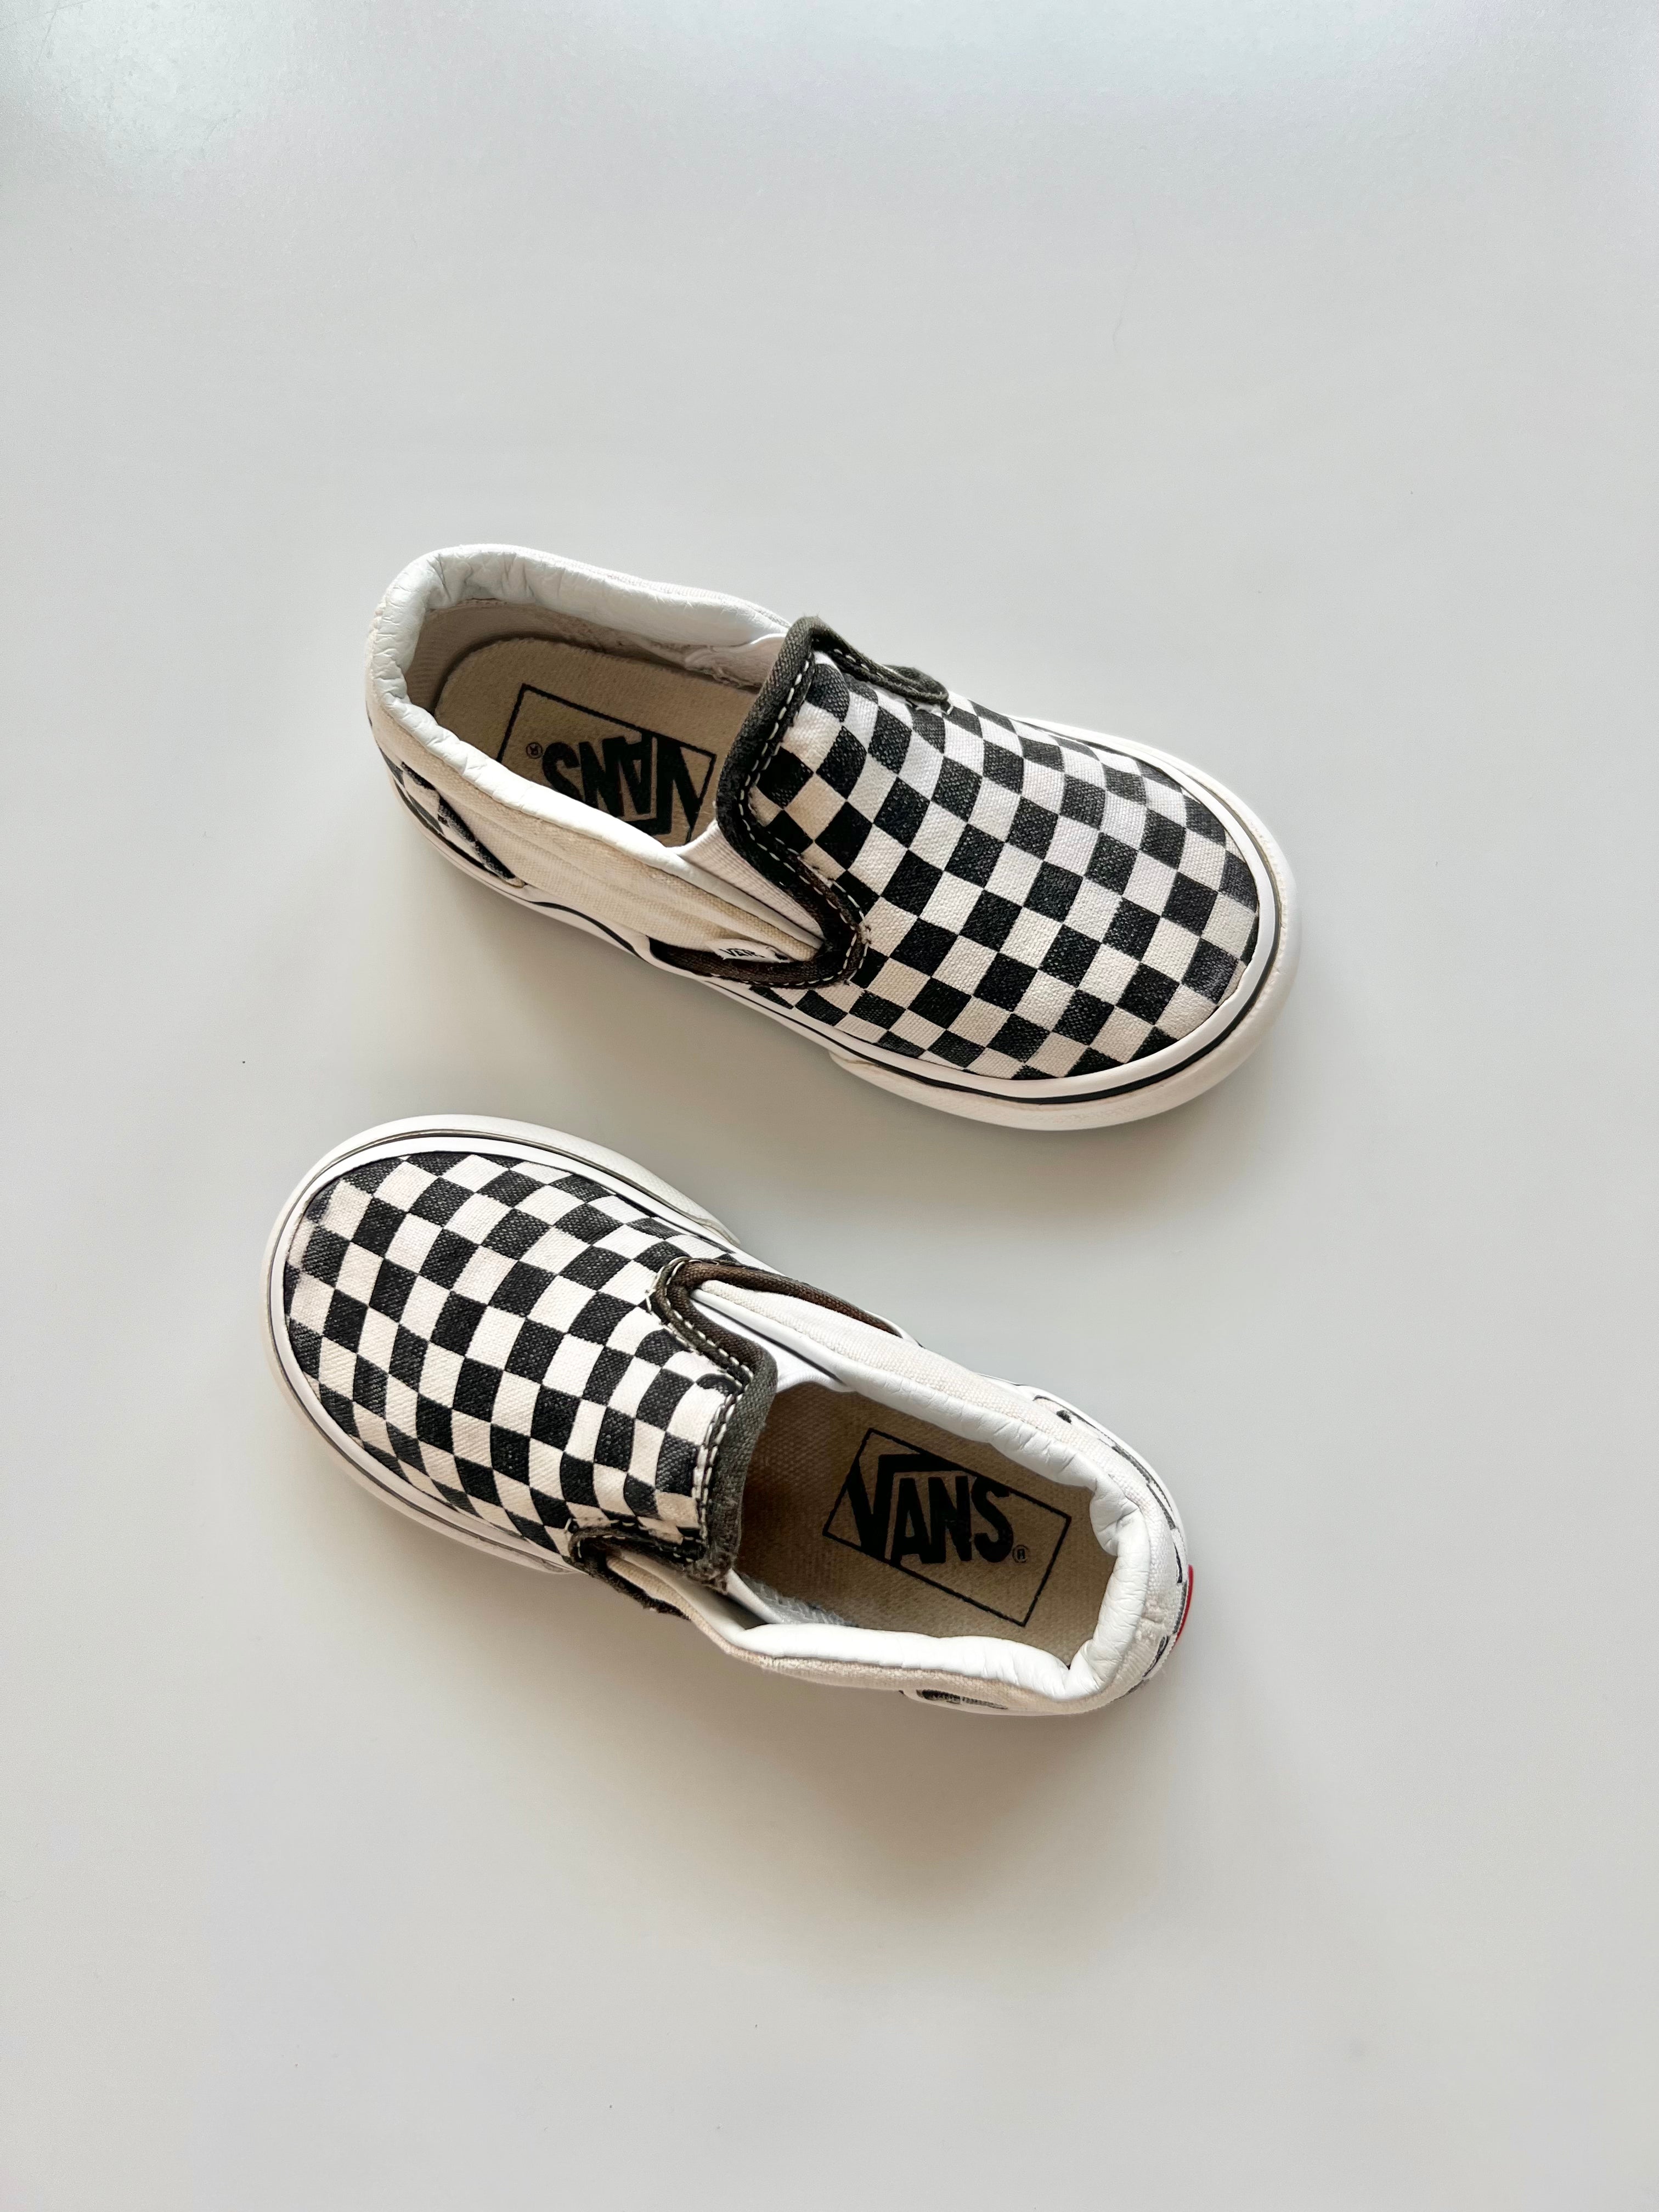 Vans Checkerboard Skate Shoes Size 7